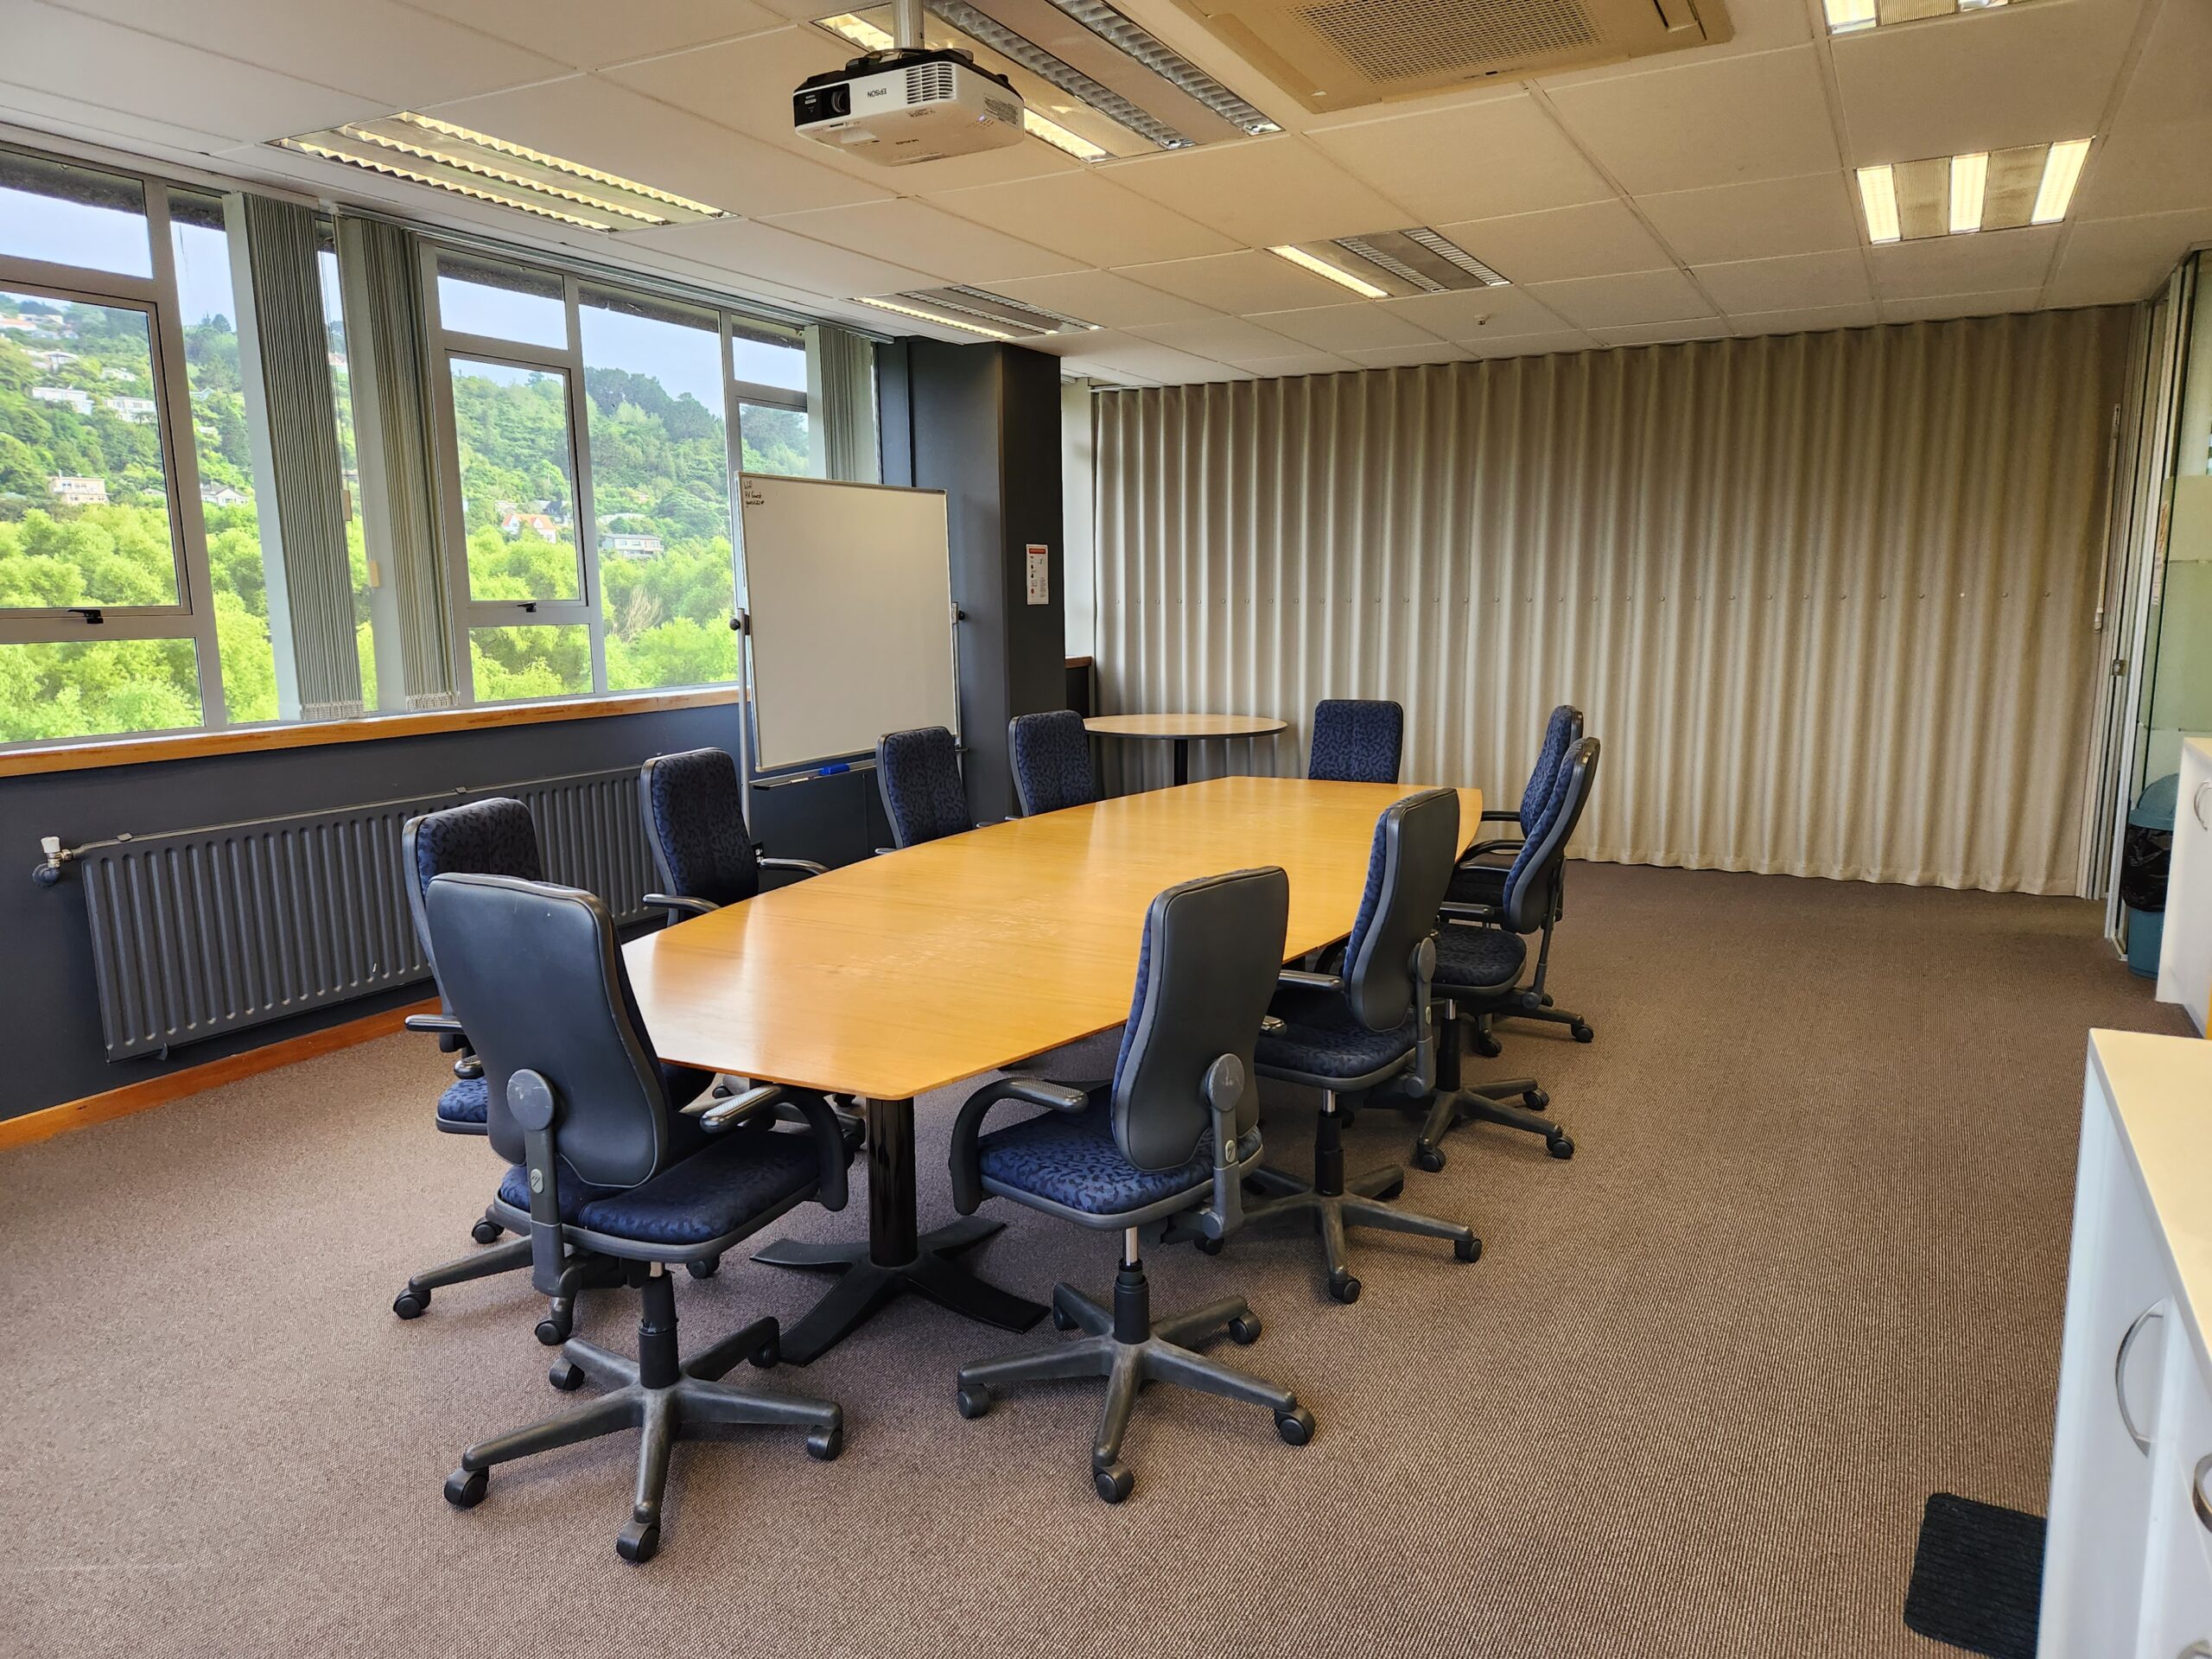 Hutt Valley Chamber of Commerce Boardroom - Meeting Room For Hire In Lower Hutt